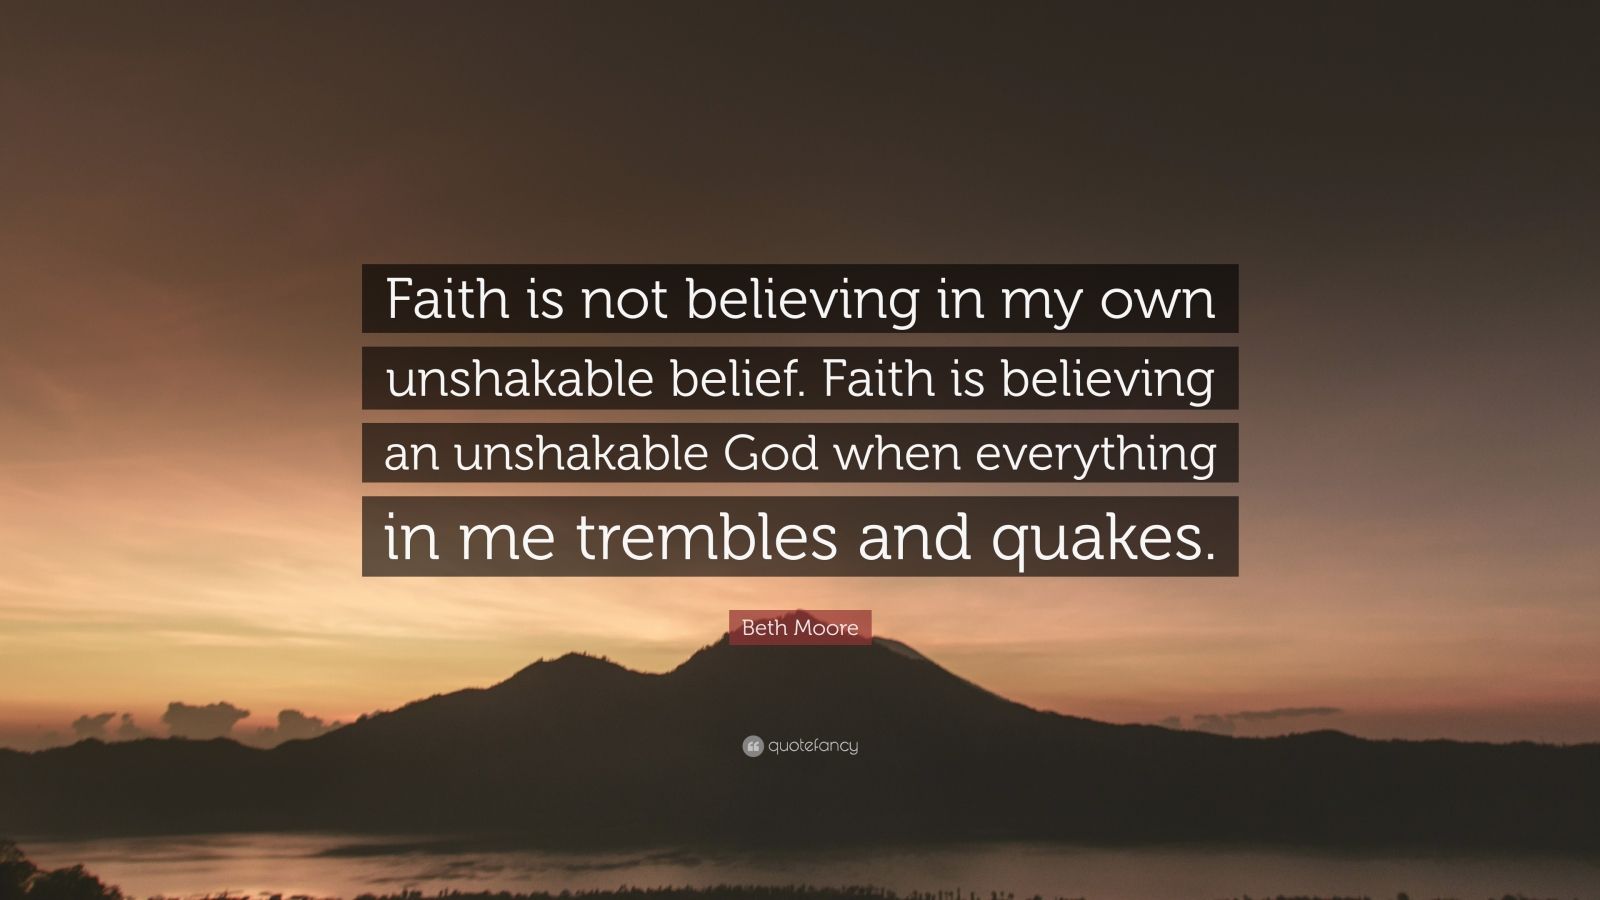 Beth Moore Quote “faith Is Not Believing In My Own Unshakable Belief